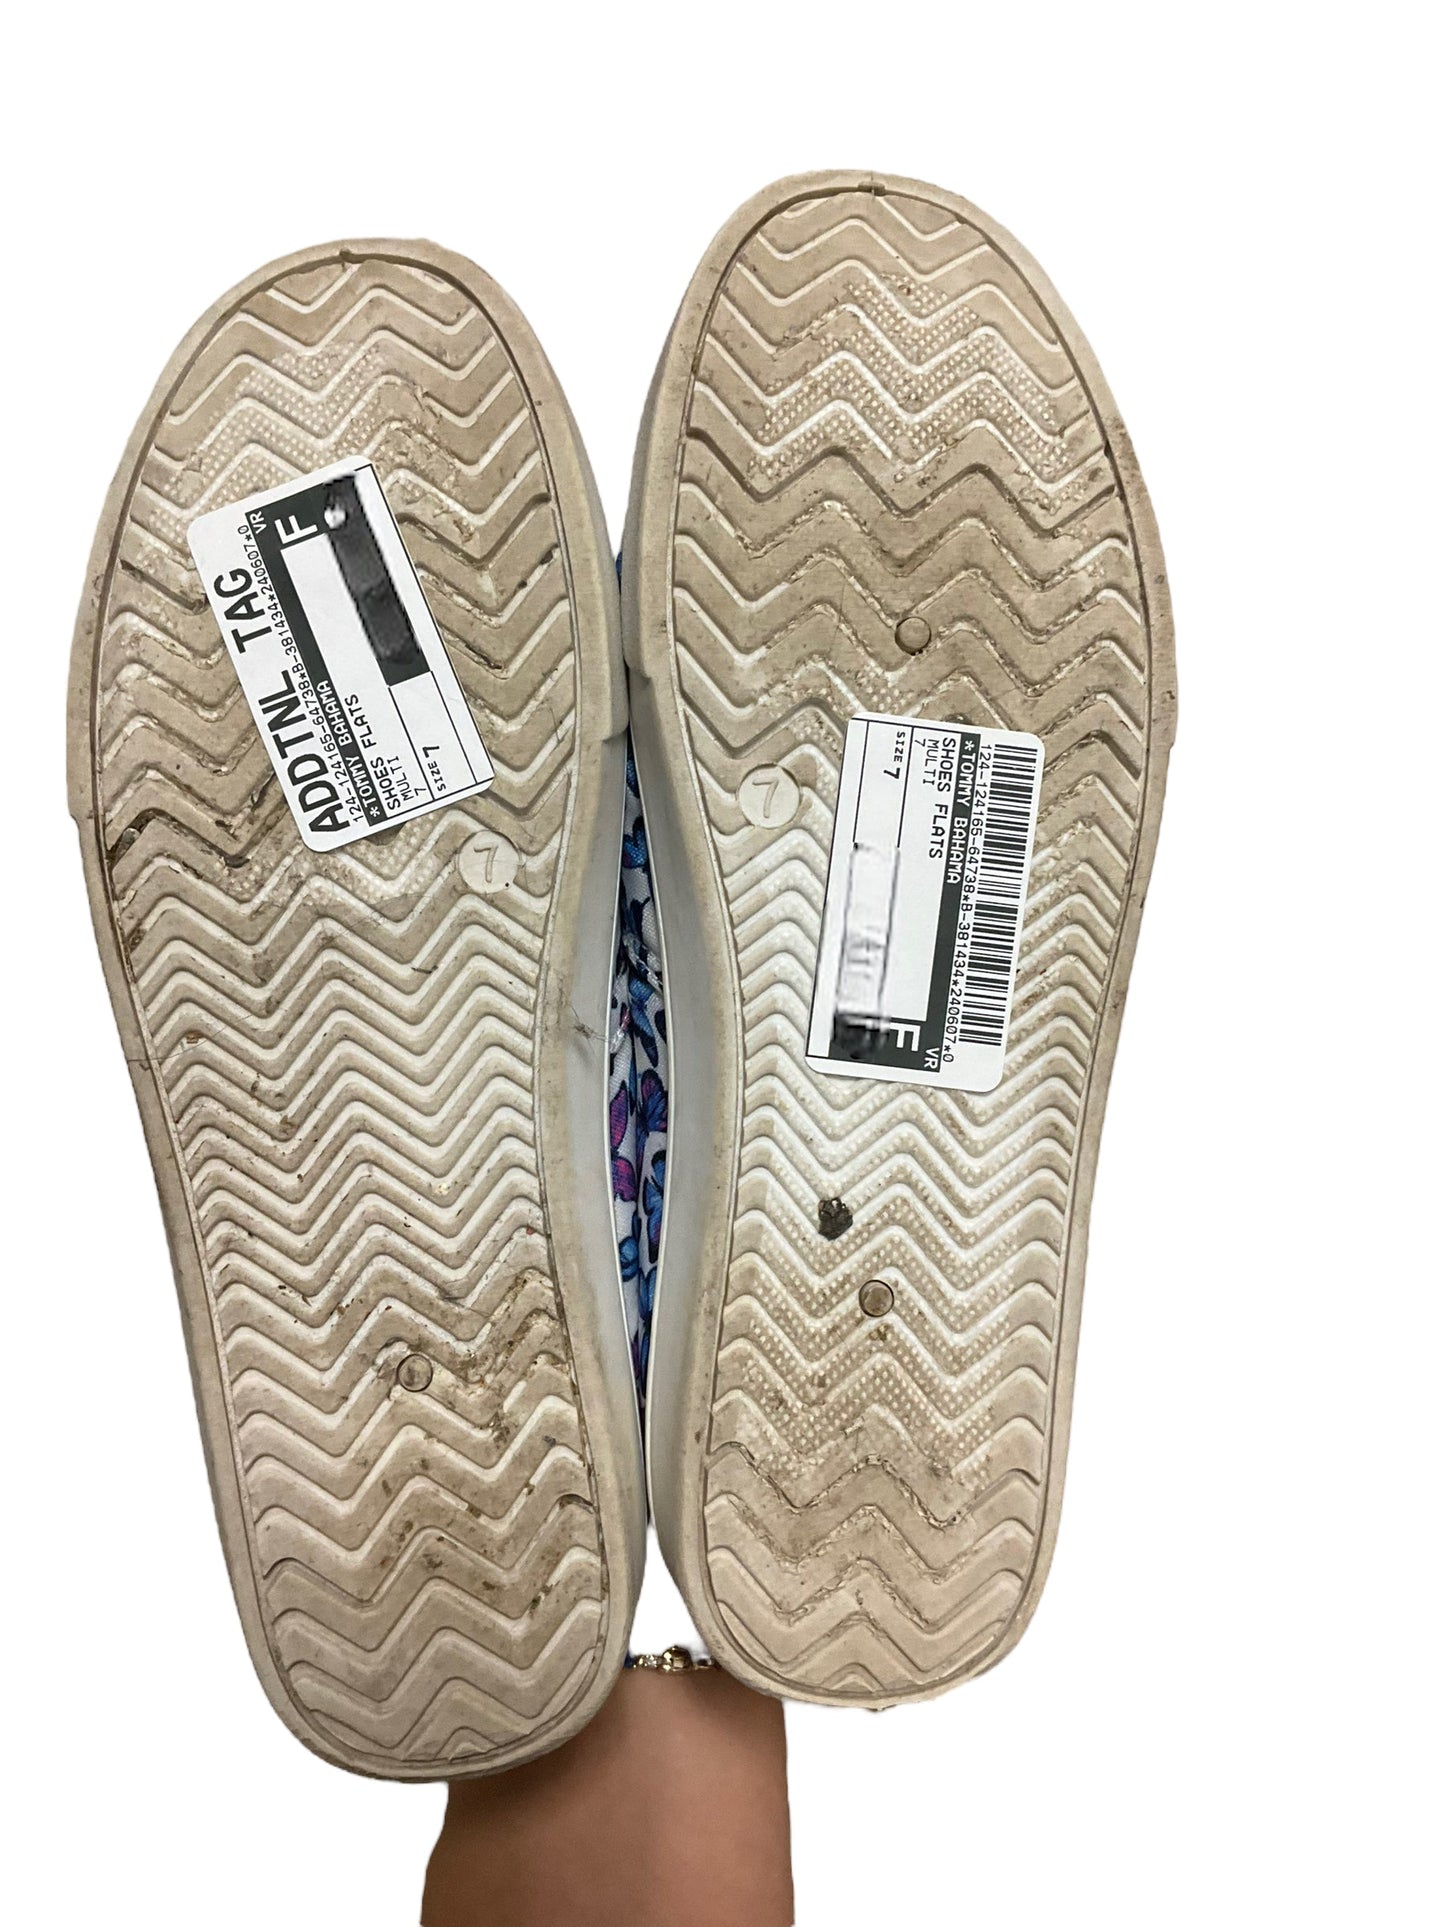 Multi-colored Shoes Flats Tommy Bahama, Size 7